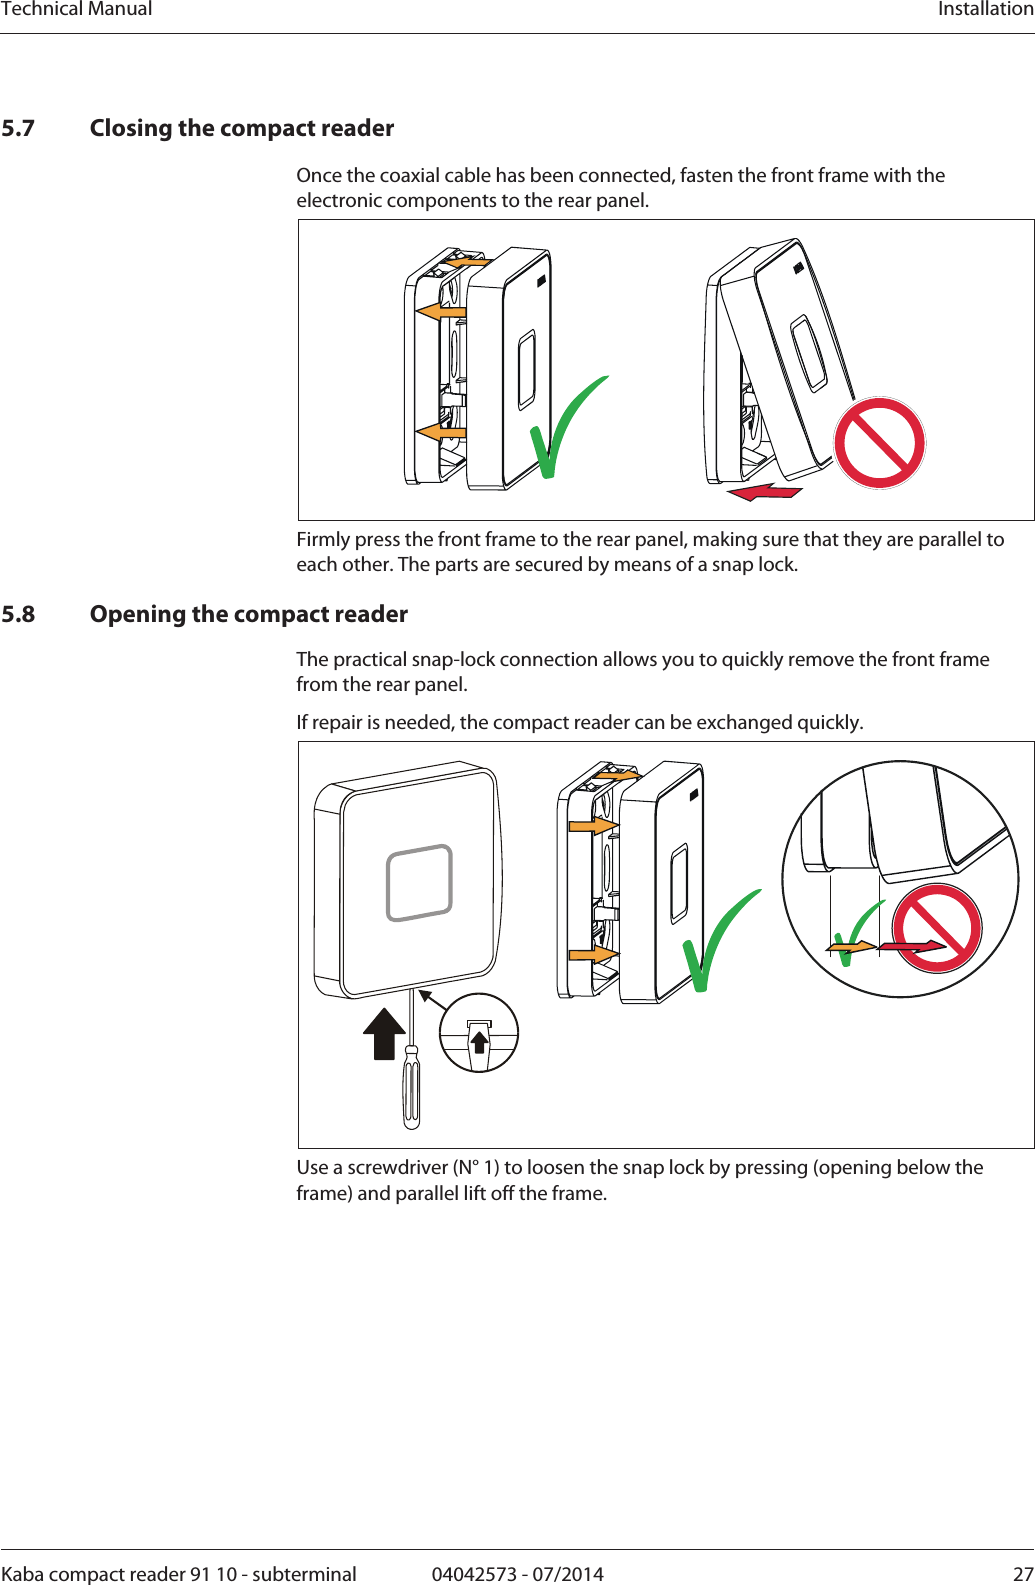 Technical Manual  InstallationKaba compact reader 91 10 - subterminal  04042573 - 07/2014  275.7 Closing the compact reader Once the coaxial cable has been connected, fasten the front frame with the electronic components to the rear panel.  Firmly press the front frame to the rear panel, making sure that they are parallel to each other. The parts are secured by means of a snap lock. 5.8 Opening the compact reader The practical snap-lock connection allows you to quickly remove the front frame from the rear panel. If repair is needed, the compact reader can be exchanged quickly.  Use a screwdriver (N° 1) to loosen the snap lock by pressing (opening below the frame) and parallel lift off the frame. 